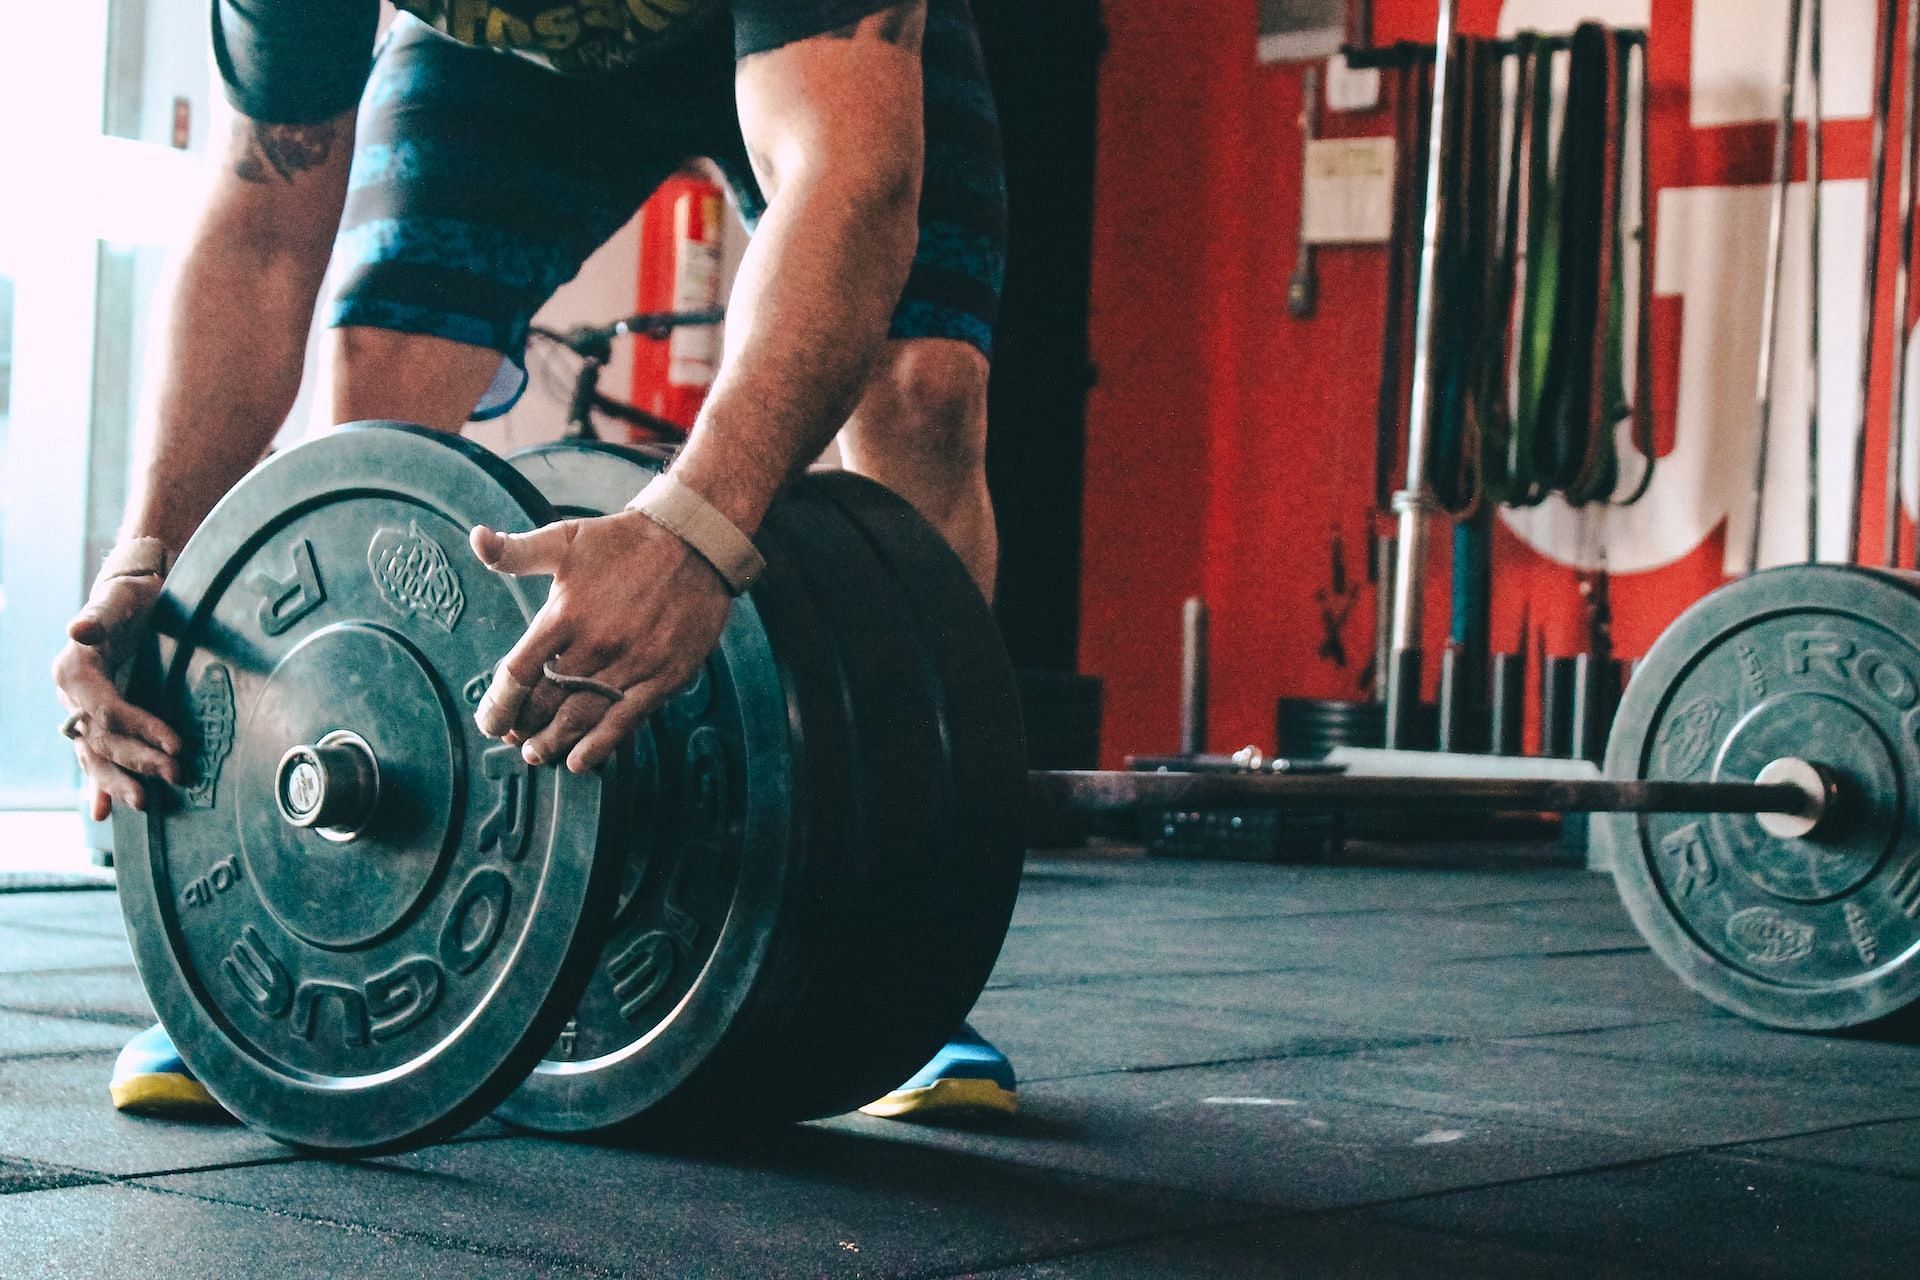 Guide to best lower body barbell exercises for strength. (Photo by Victor Freitas on Unsplash)